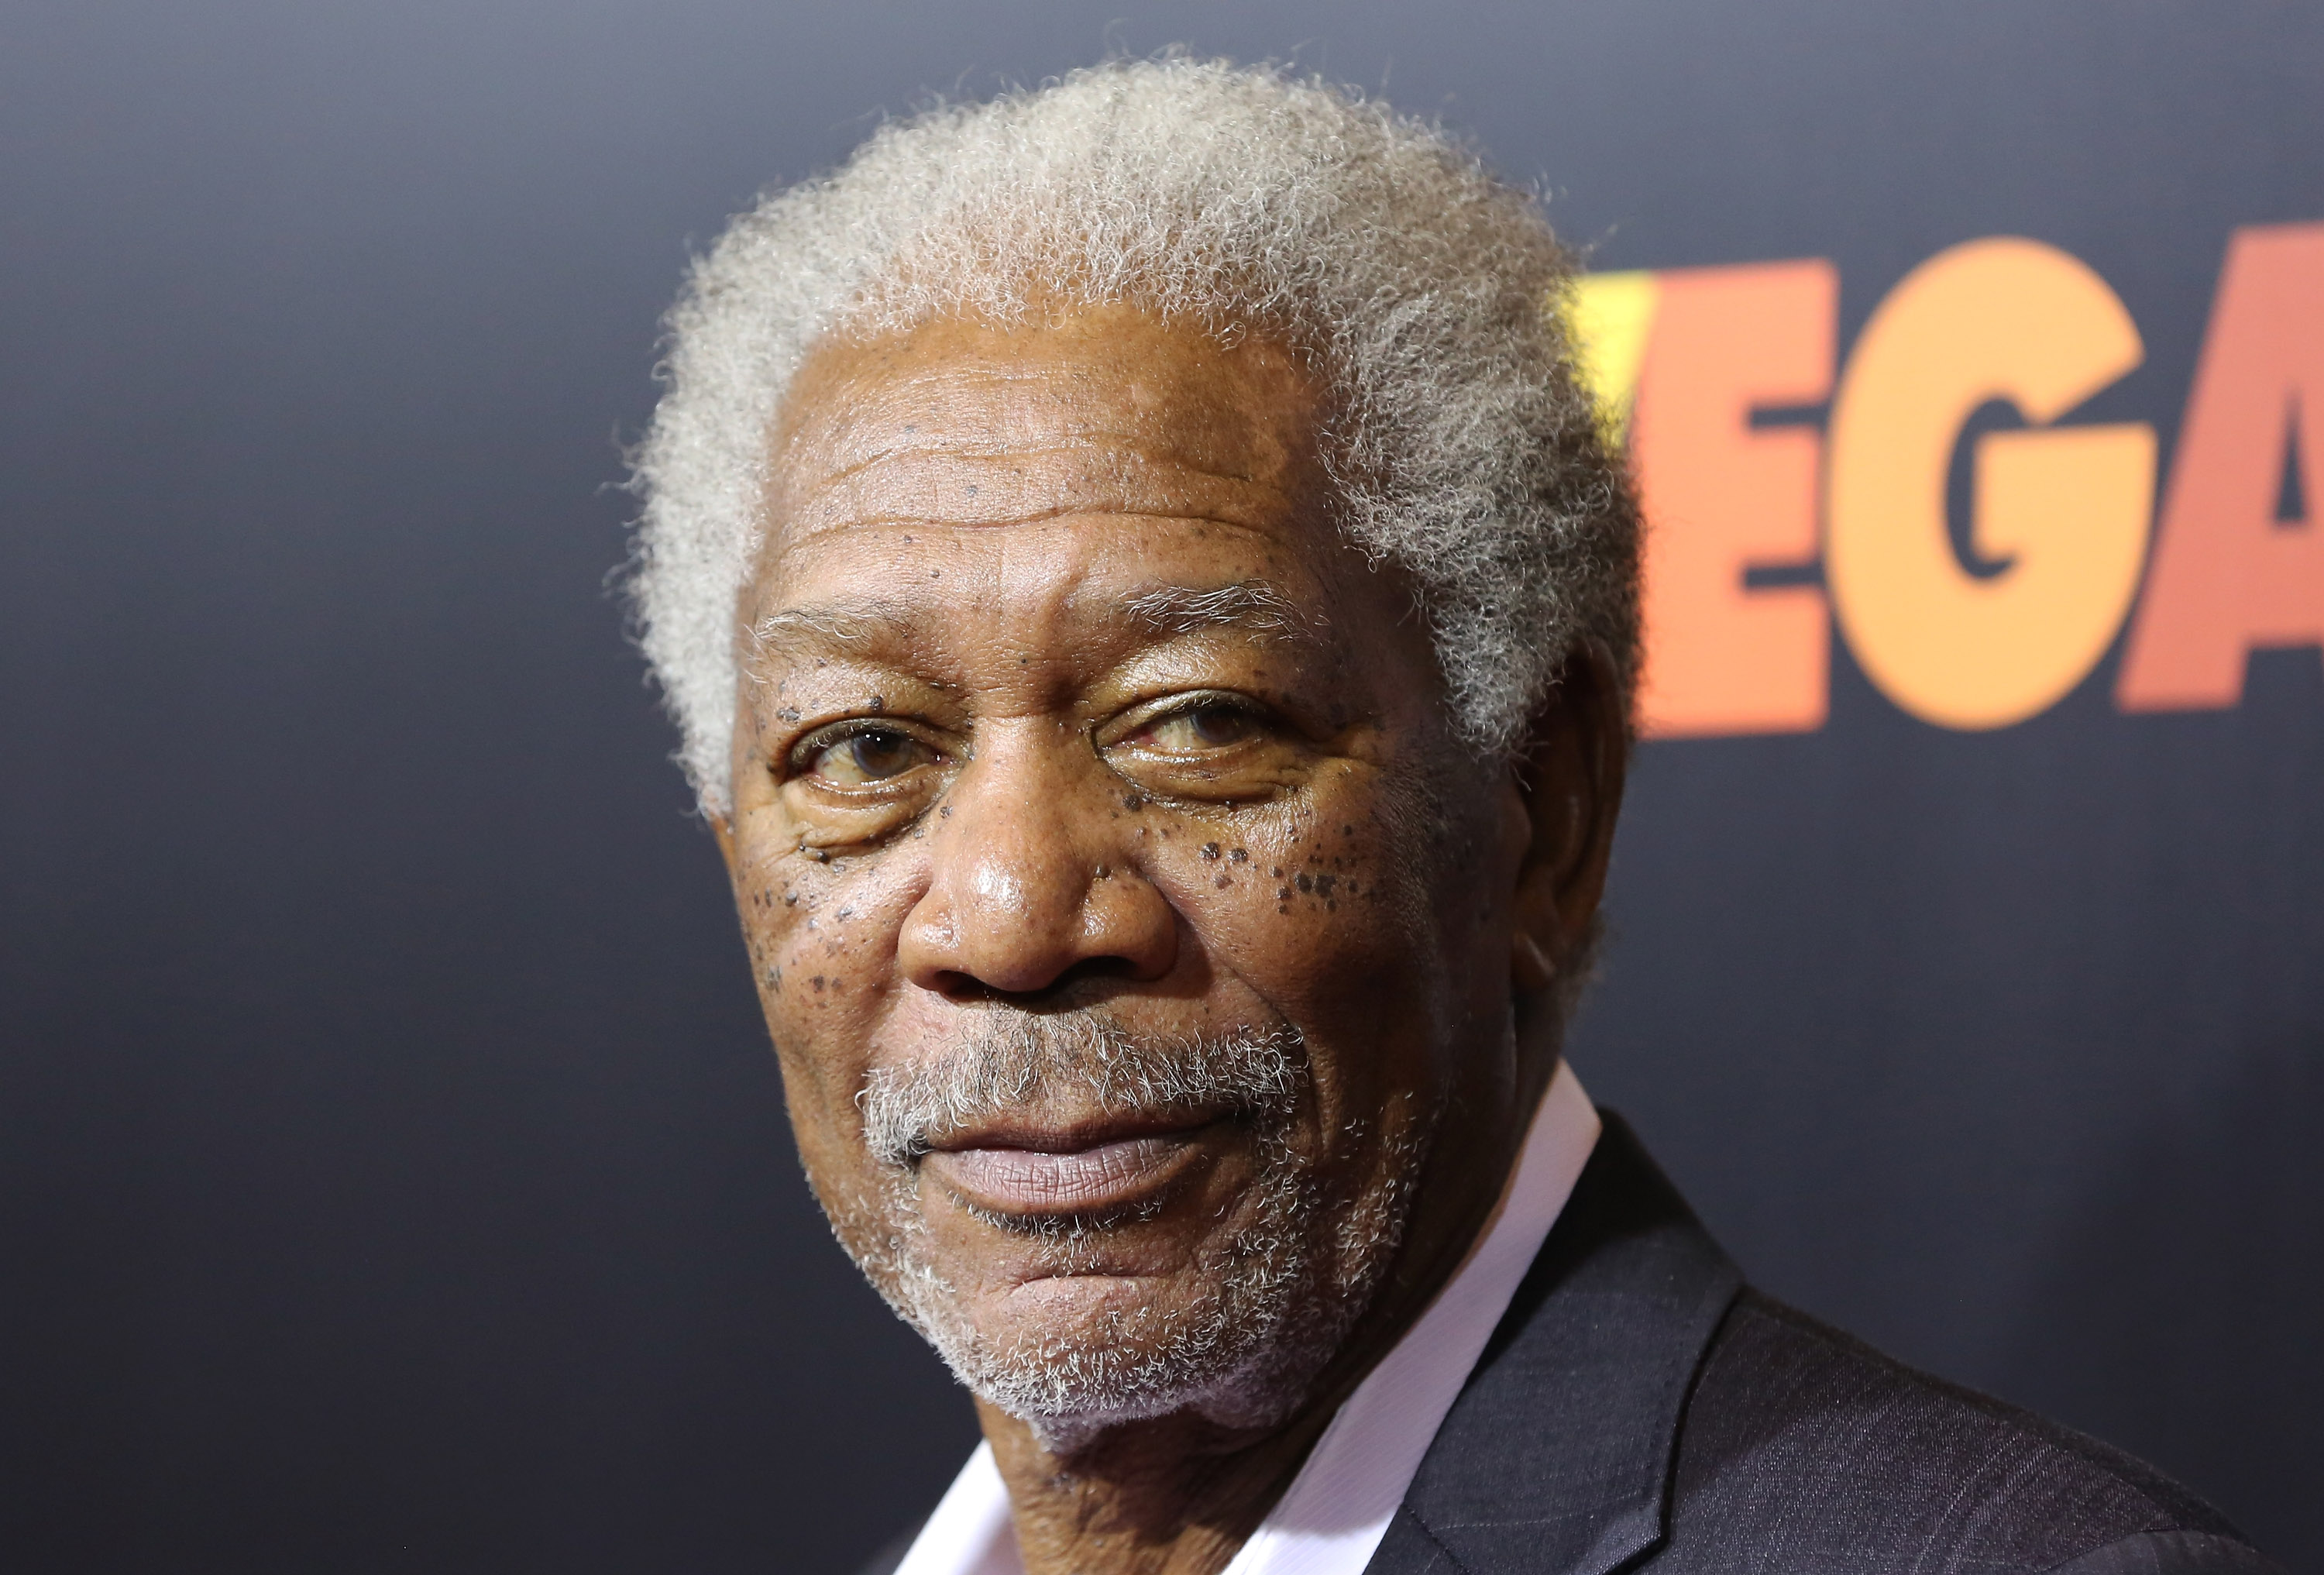 Morgan Freeman at the "Last Vegas" special screening party in 2013 | Source: Getty Images